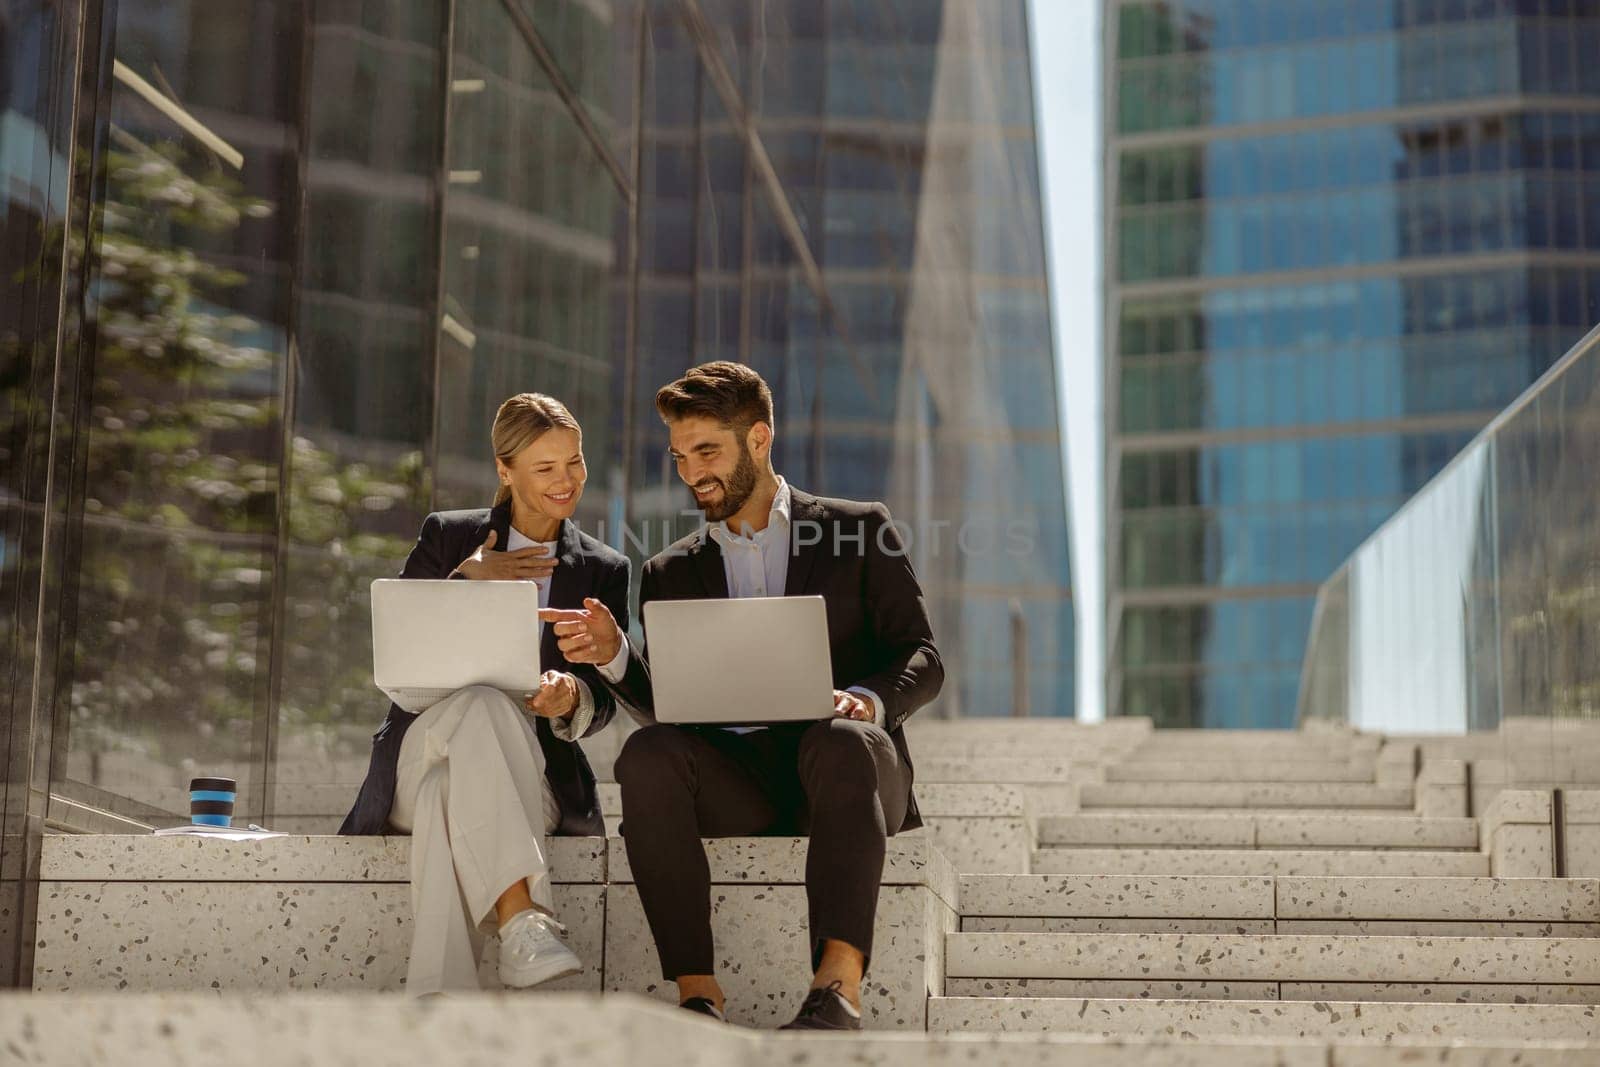 Man and woman in classic suit discussing business details and using laptop while sitting outdoors